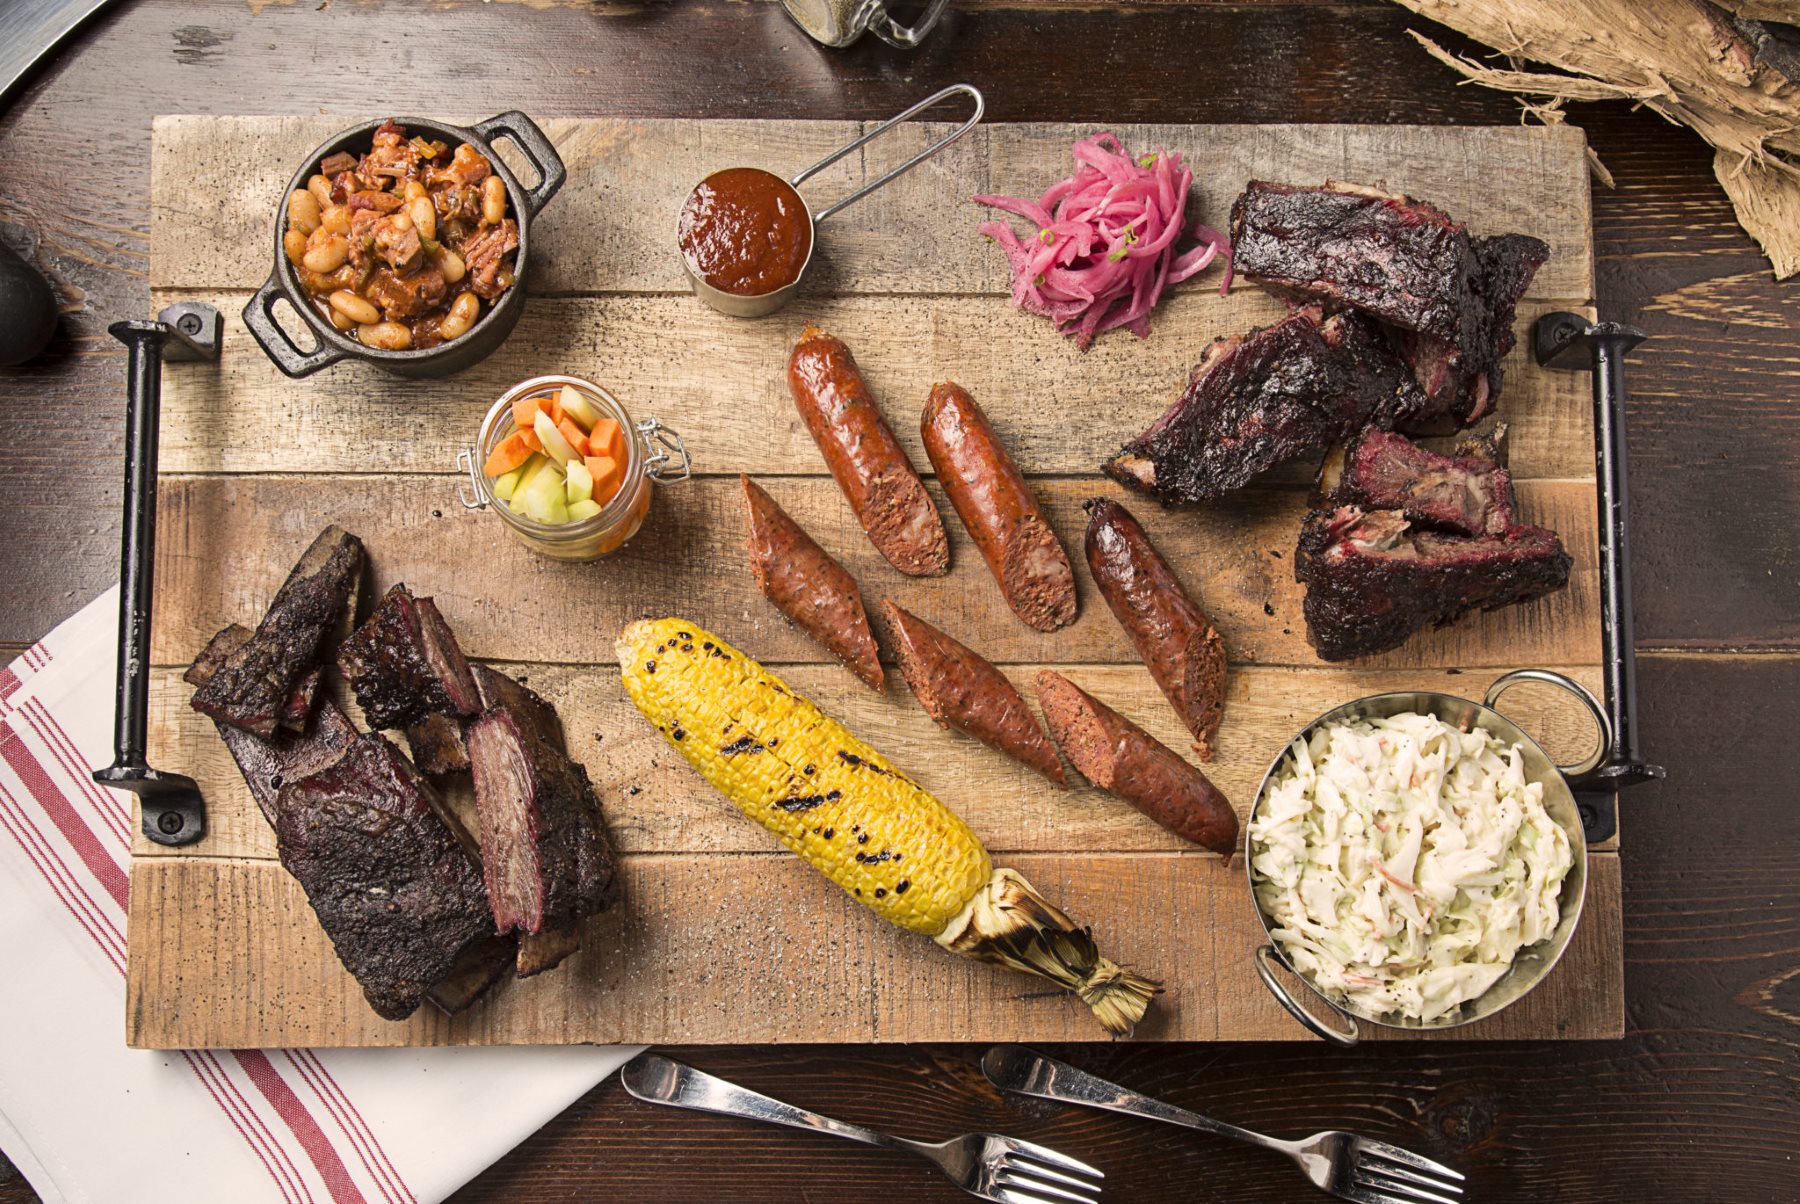  Miami now owns a BBQ Steakhouse and Smokehouse   